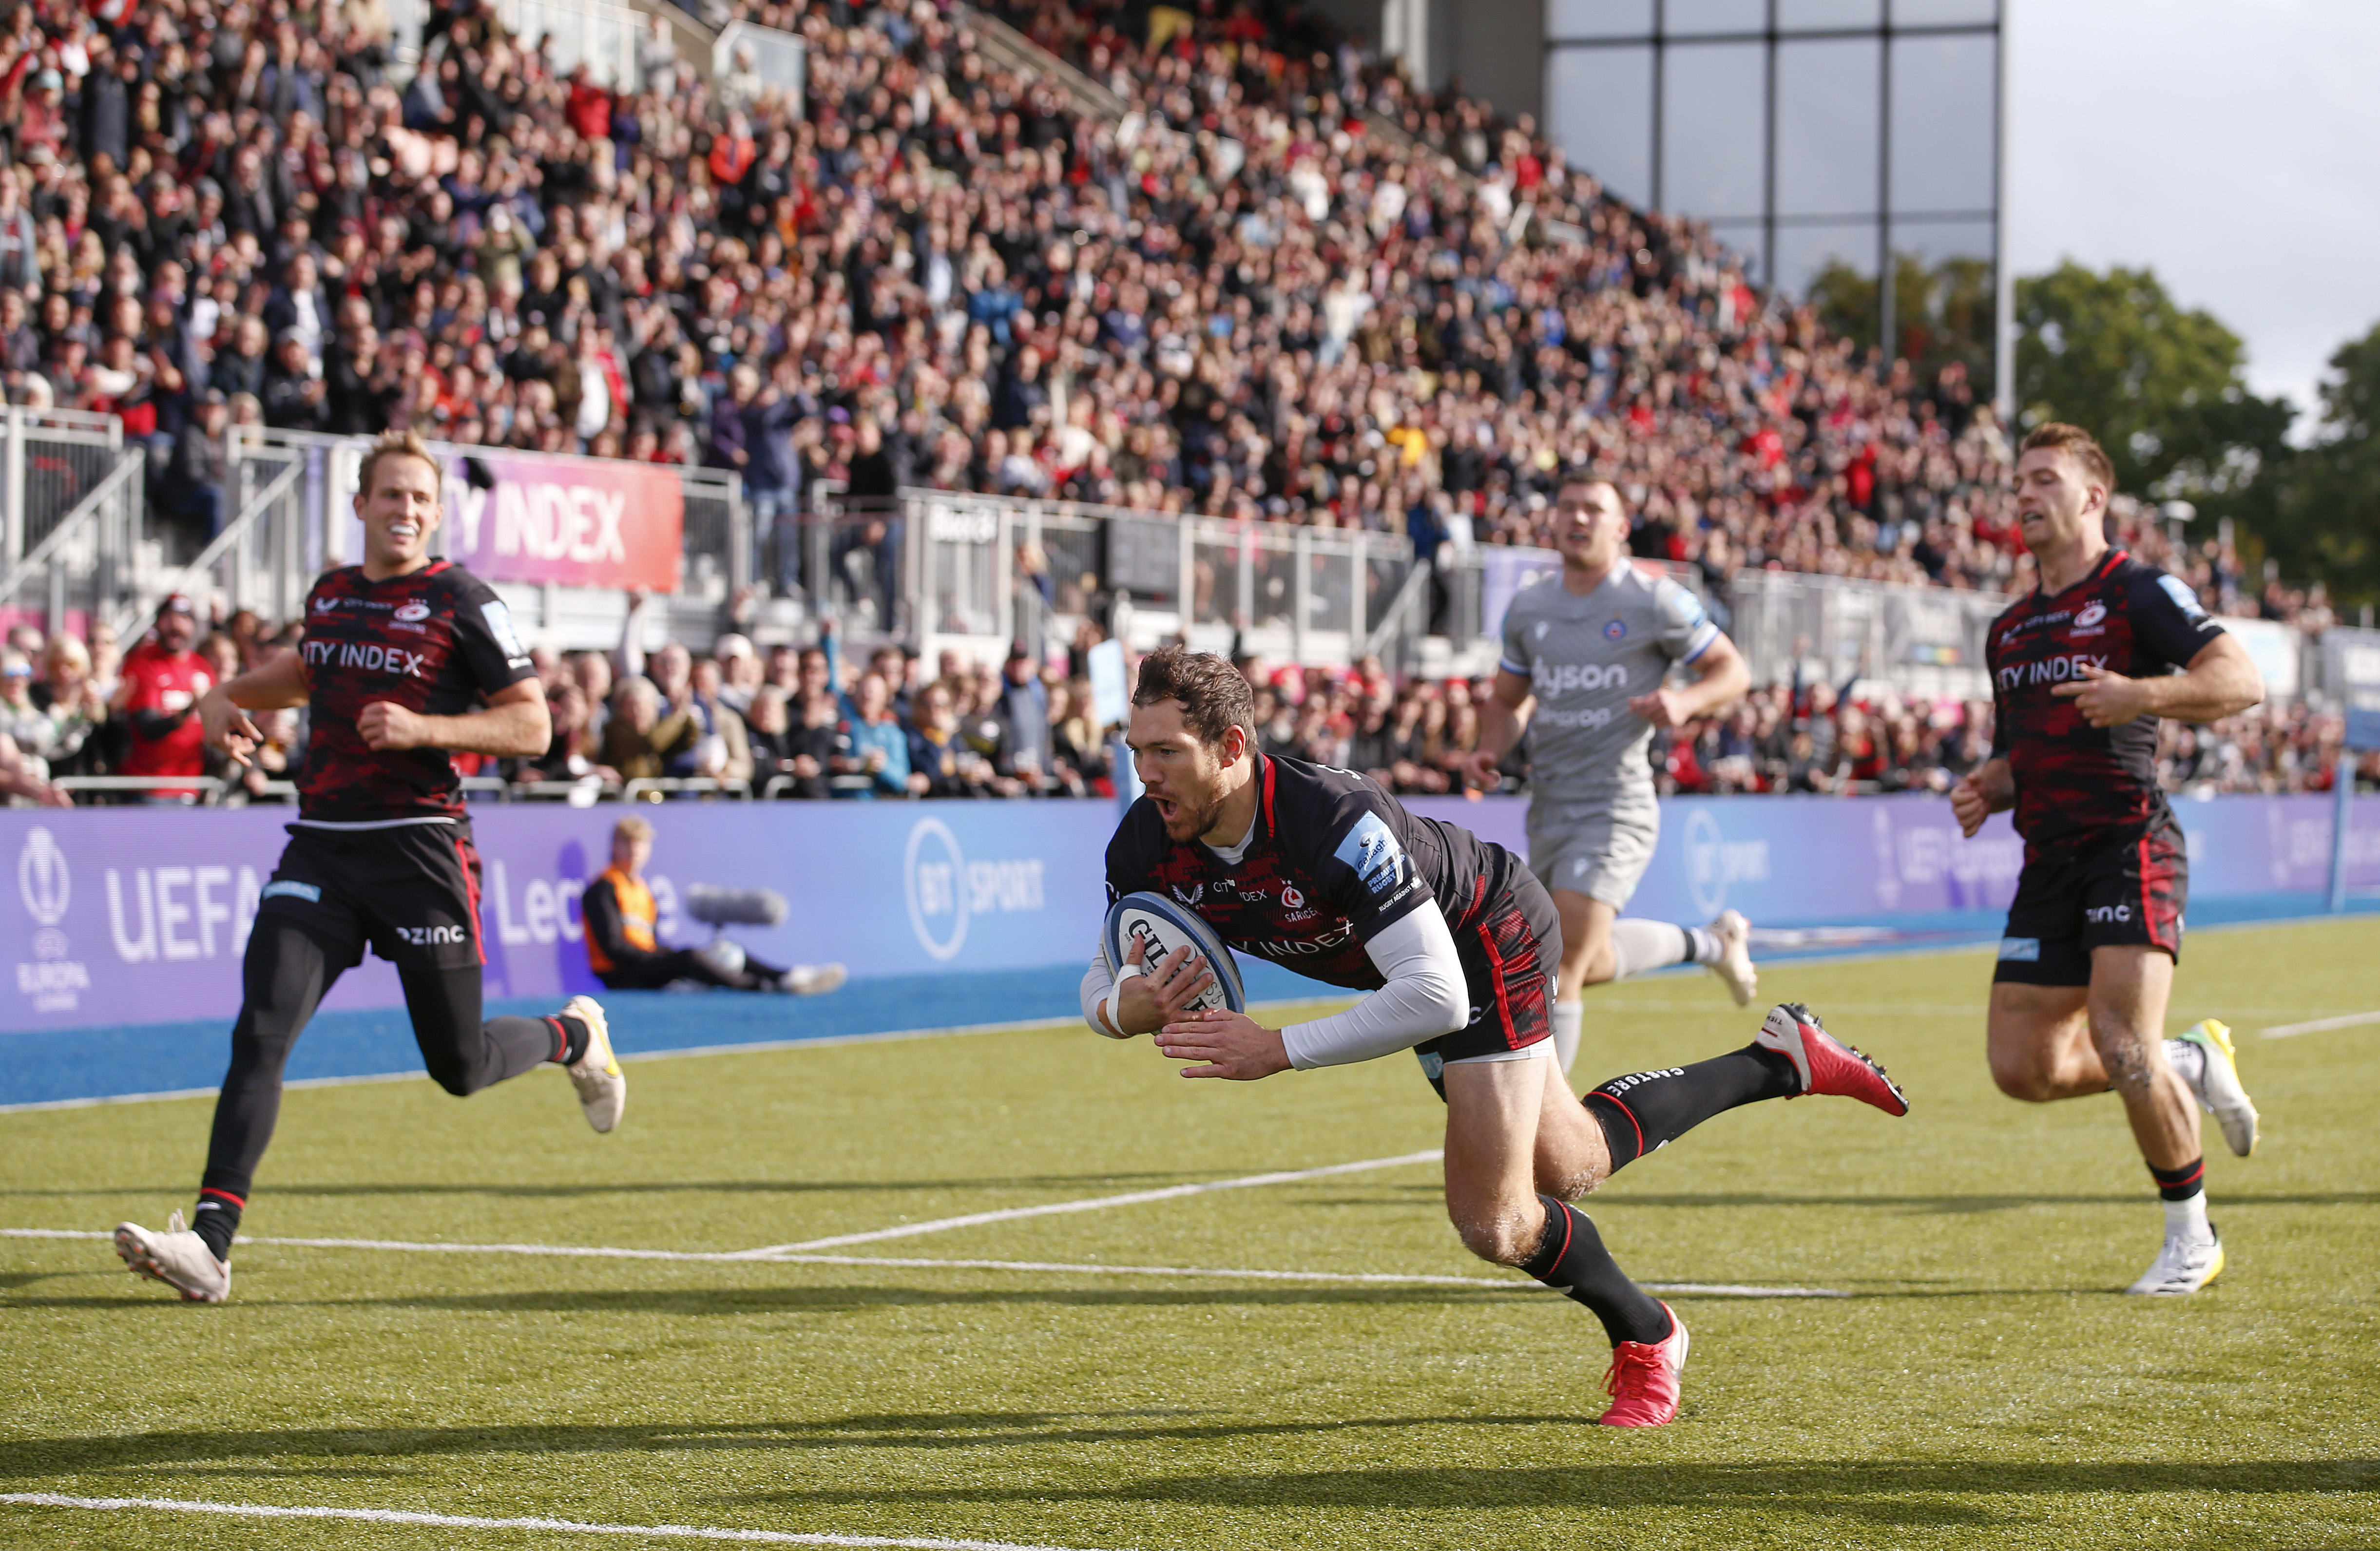 Saracens player scores a try.